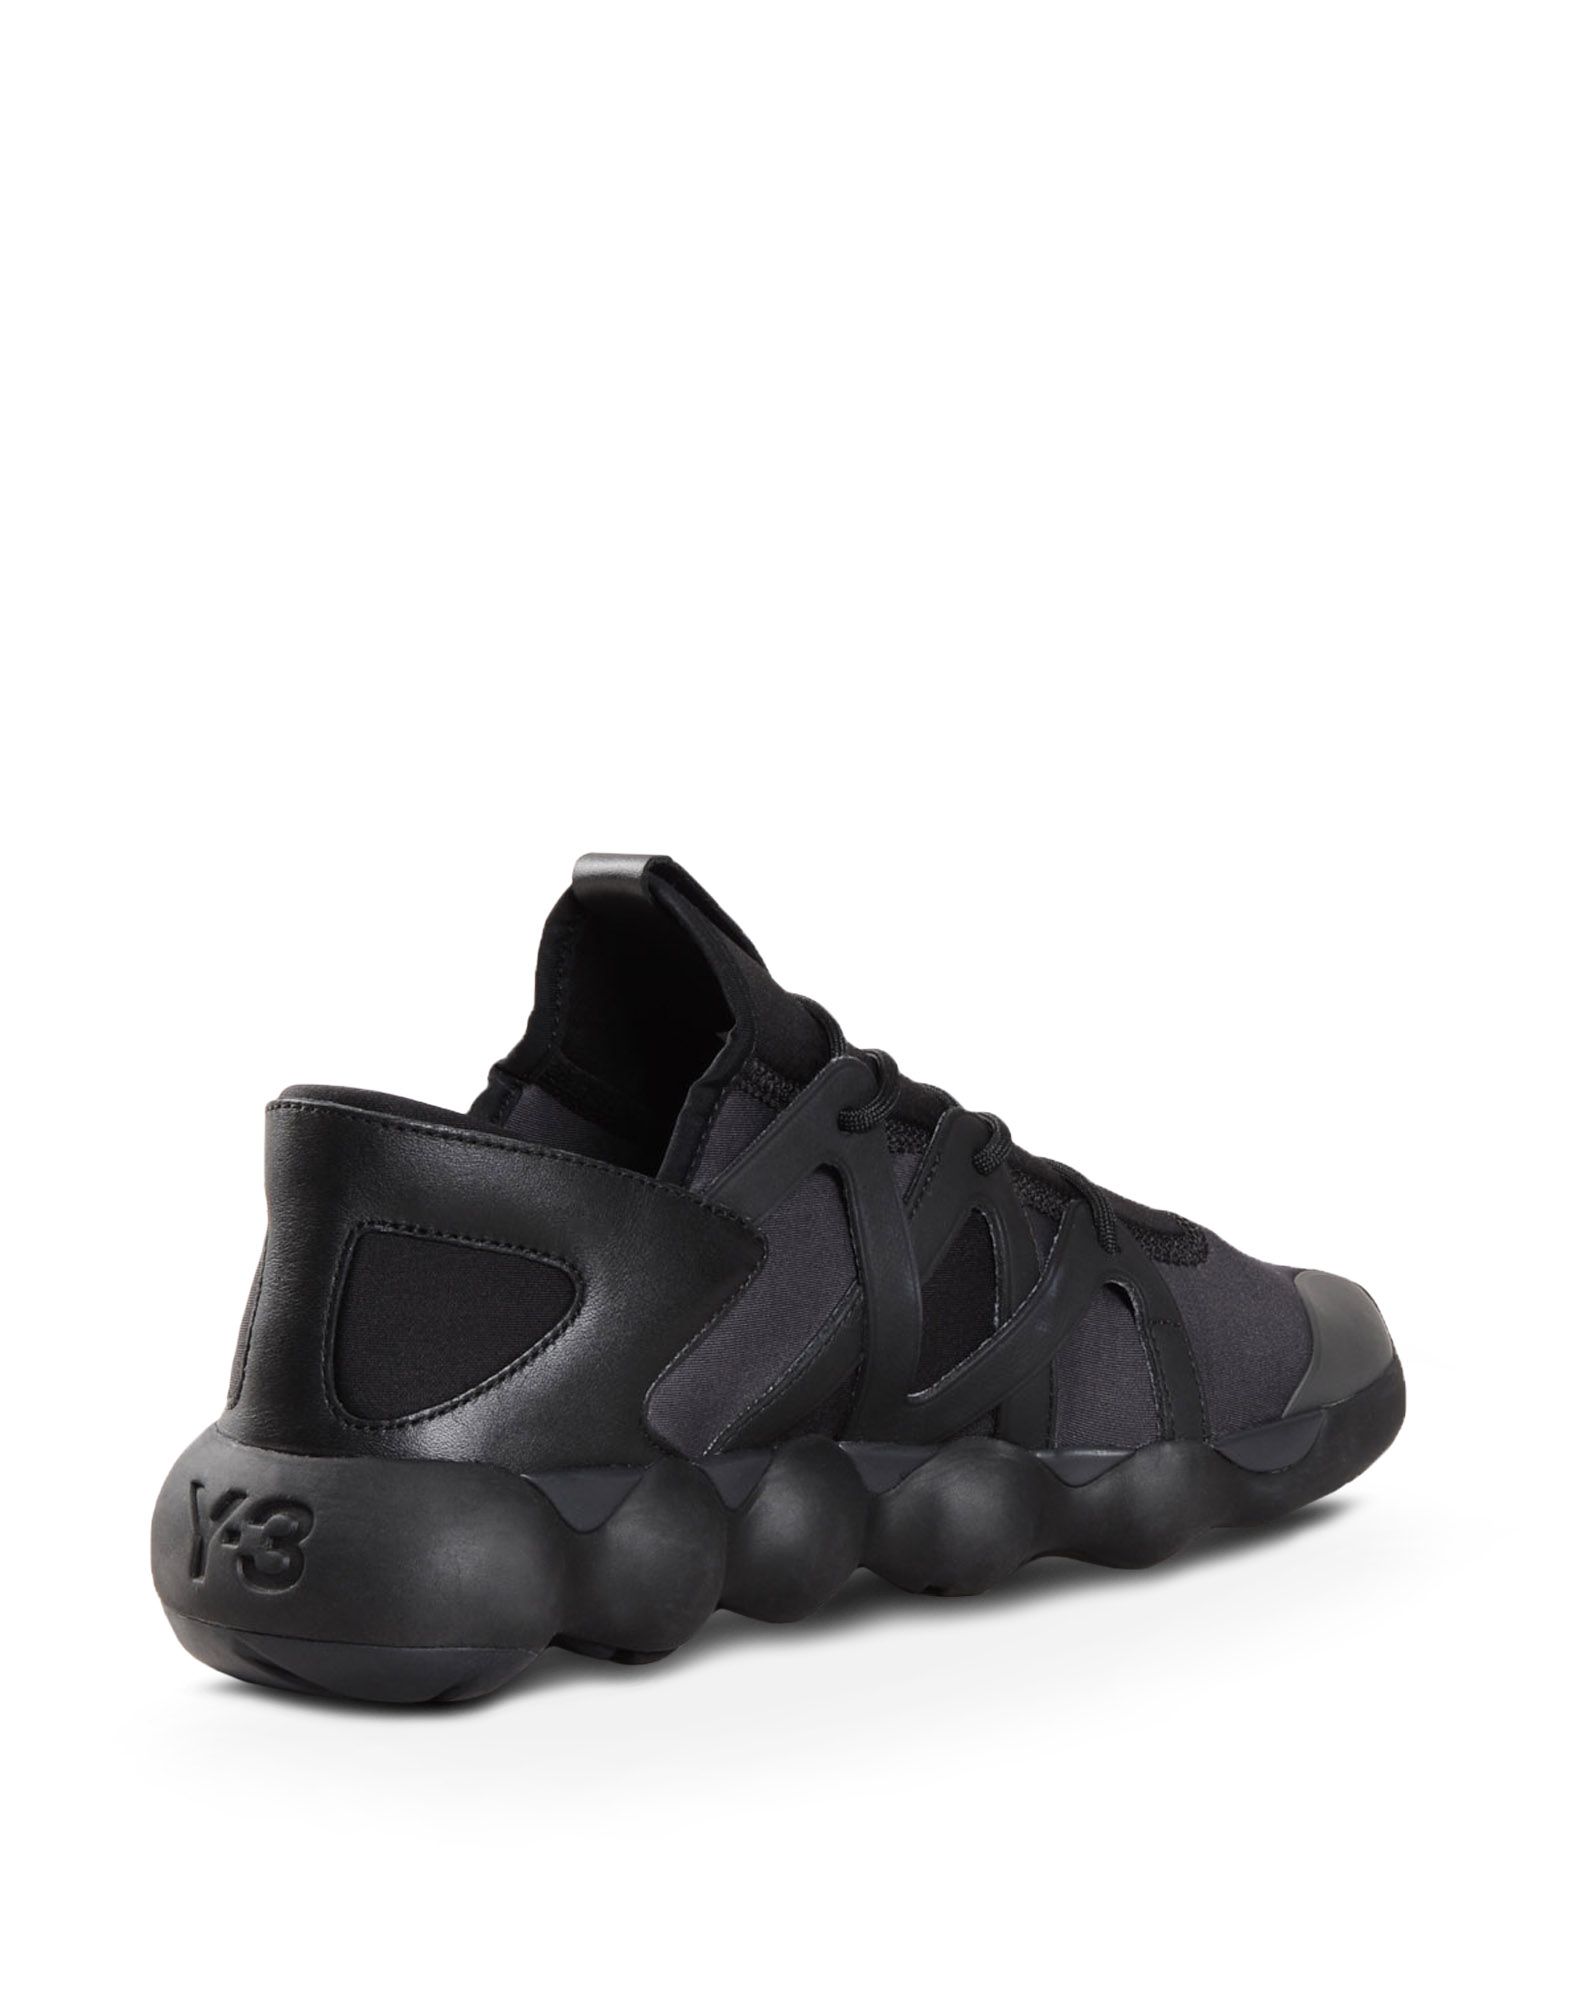 Y 3 KYUJO LOW for Men | Adidas Y-3 Official Store